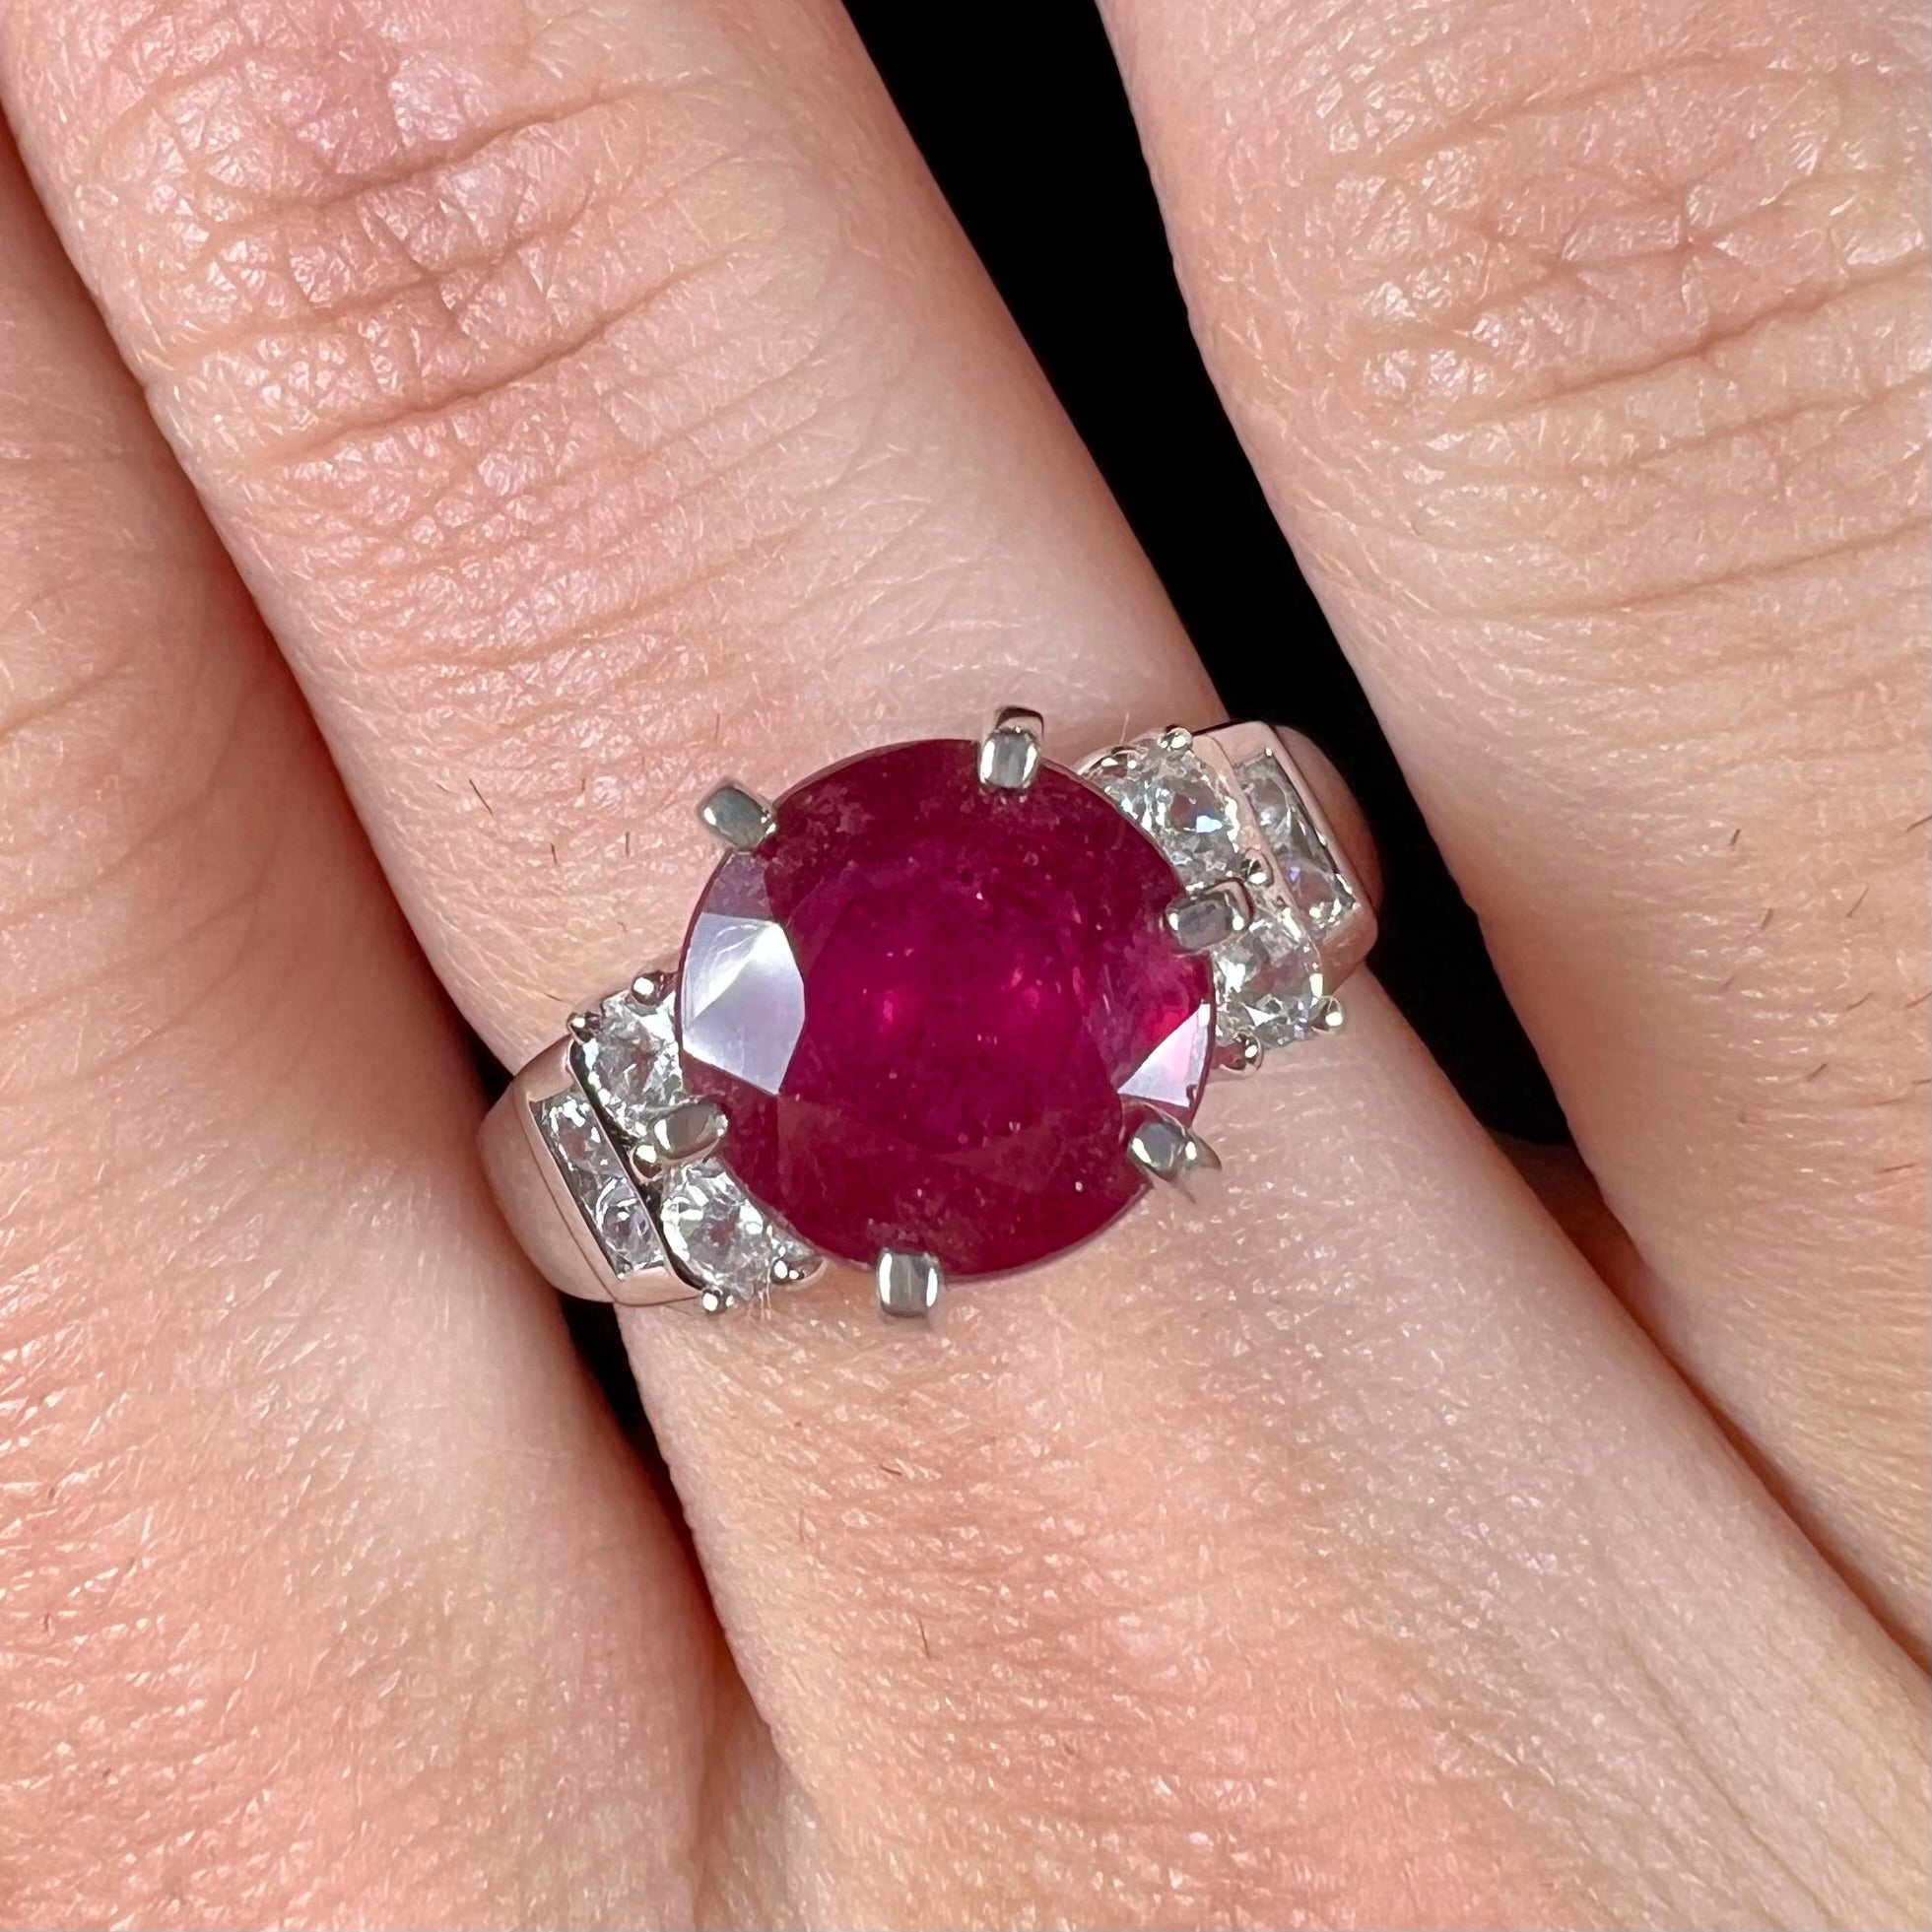 Genuine Real Natural Ruby Gemstone Ring, 12.30 Carat, Ruby Ring, King Ring,  Ruby Jewelry, Mens Sterling Silver Ring, Handmade Ring|Amazon.com